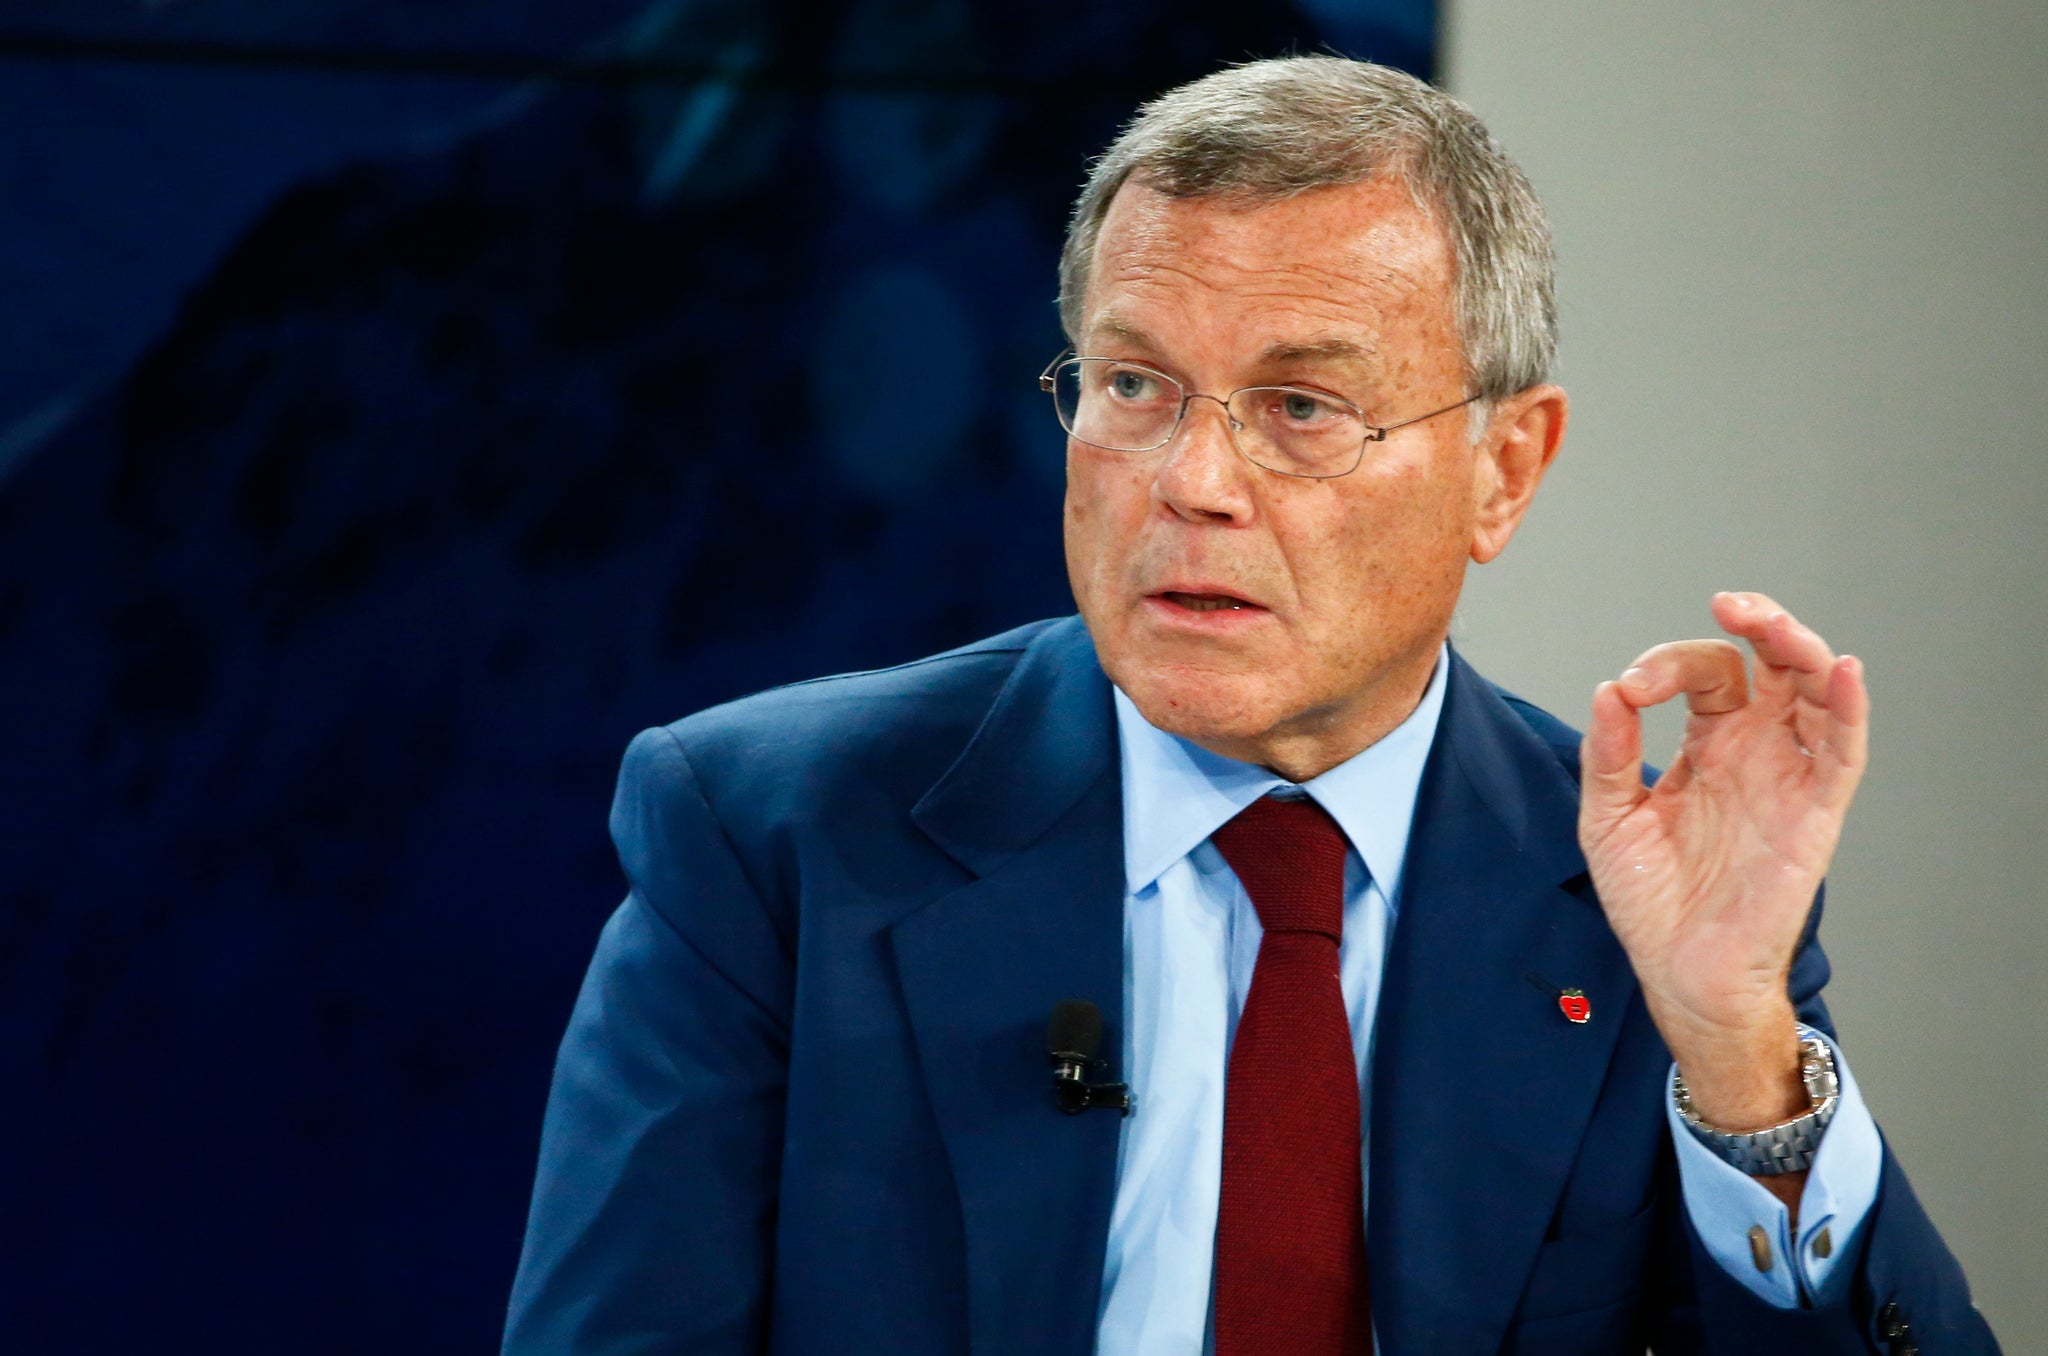 Sir Martin Sorrell said he "rejects the allegation completely"